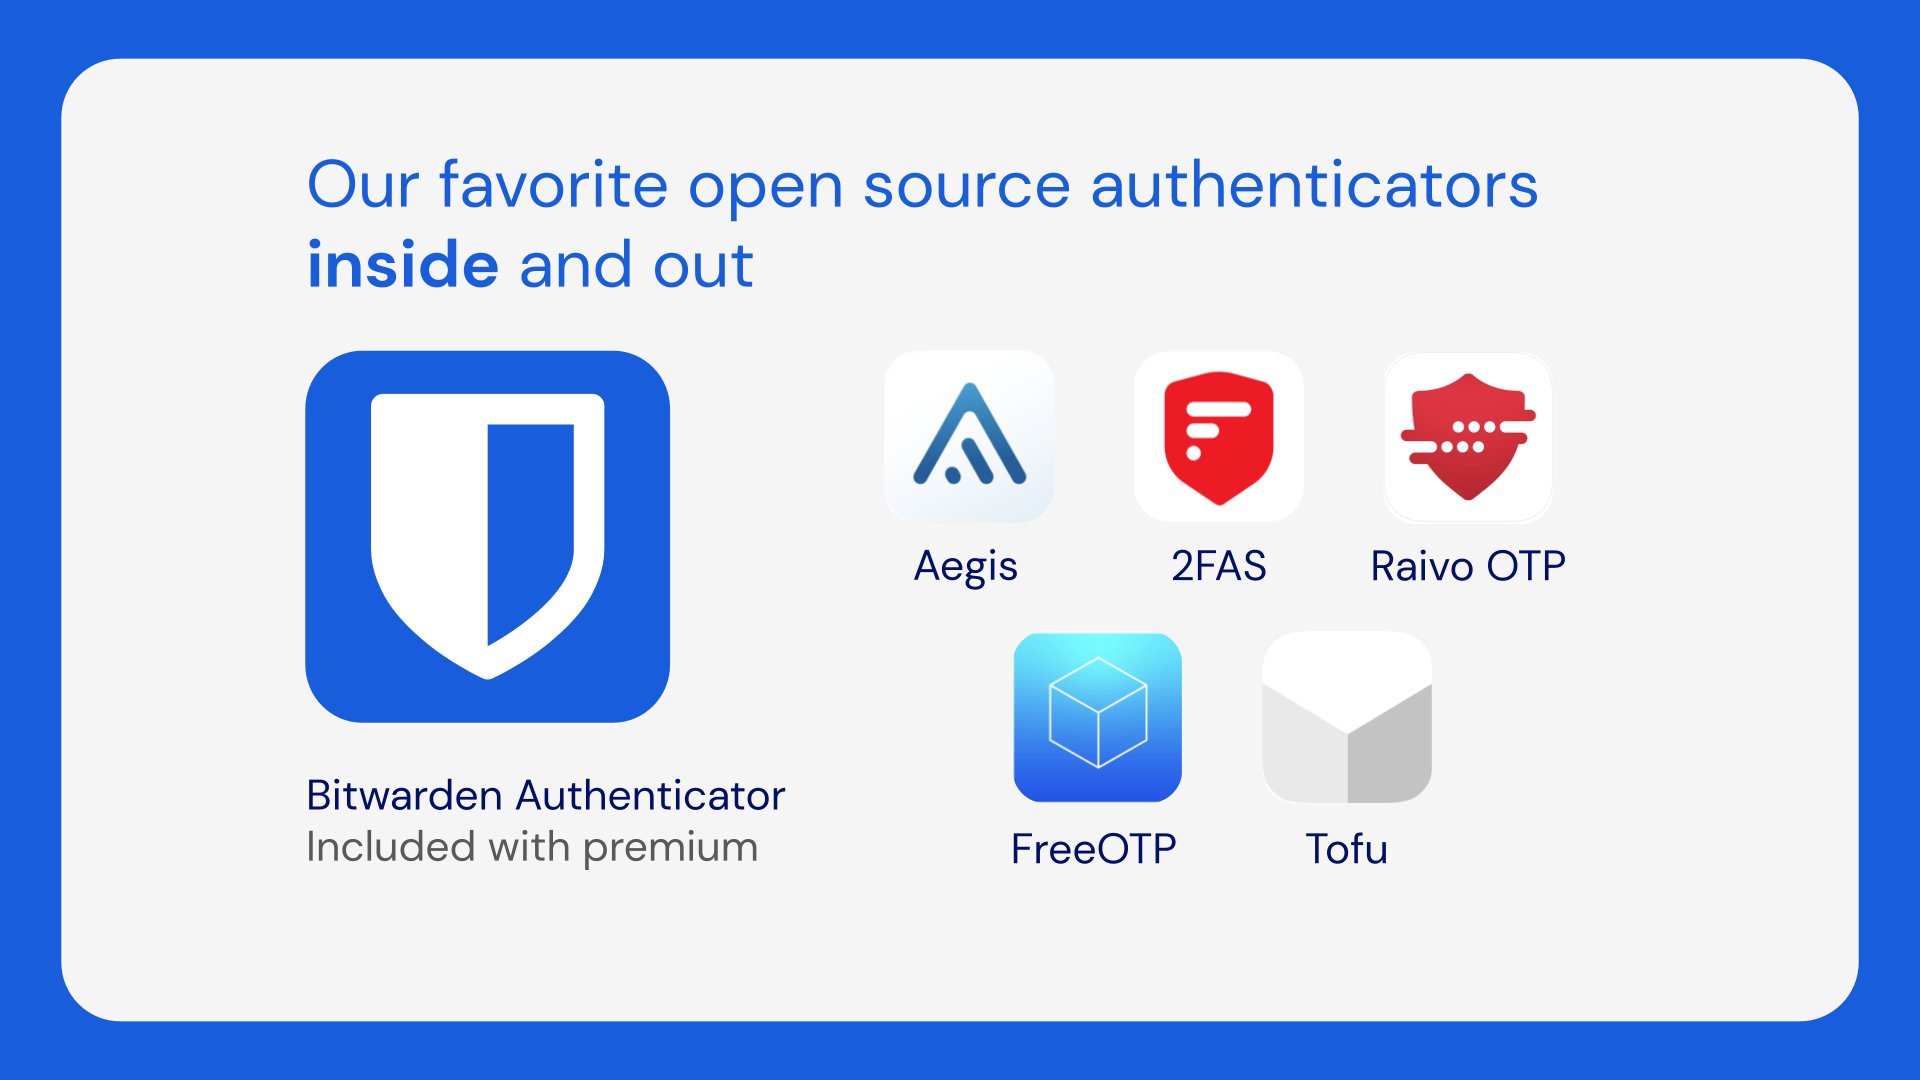 2FAS - the Internet's favorite open-source authenticator